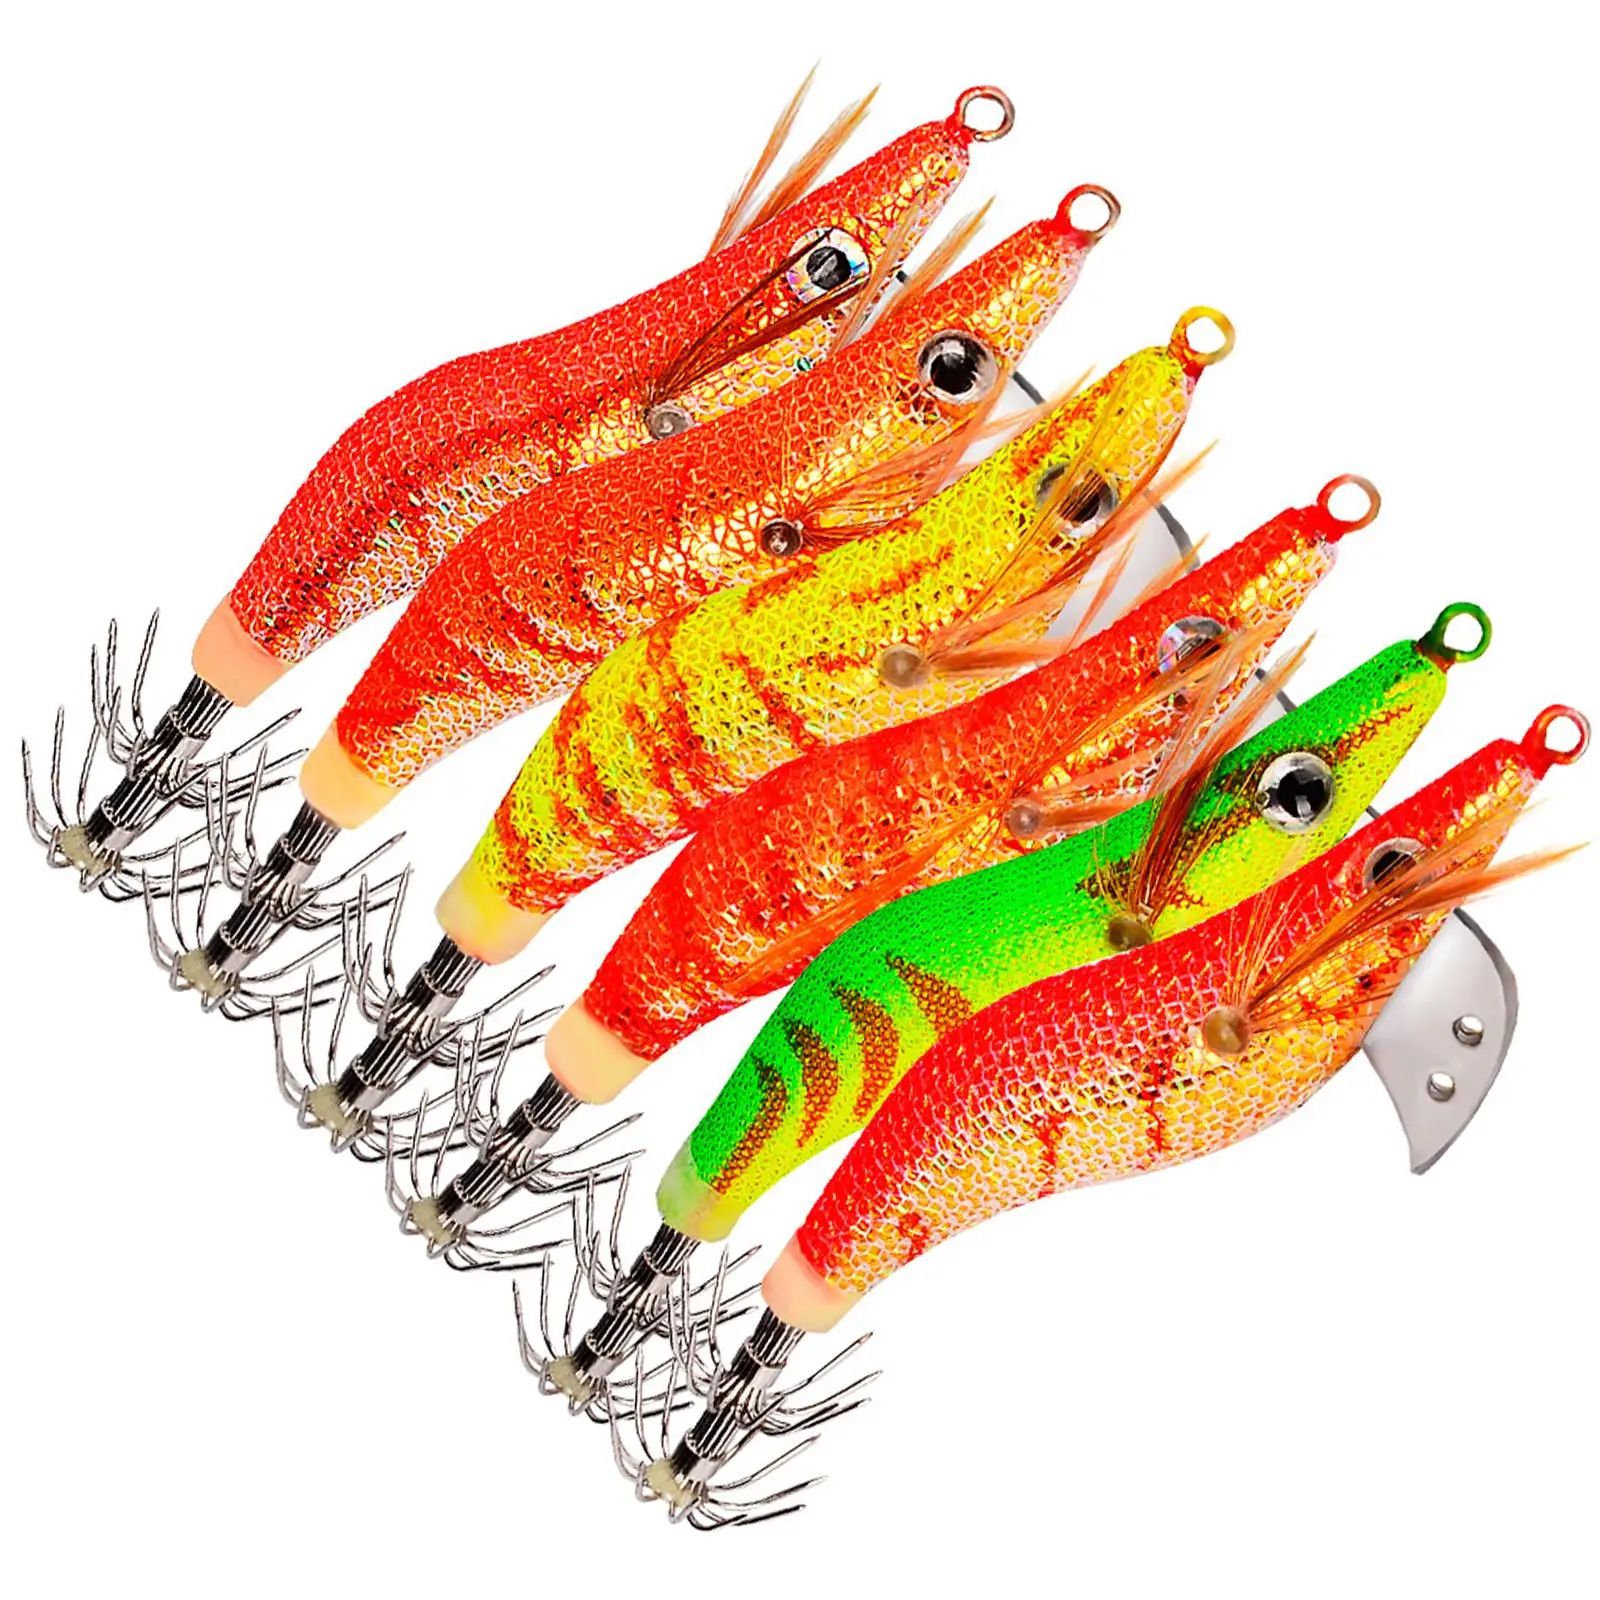 6 Pieces Squid Jig Hooks 3D Eyes Prawn Lures Fish Hook for Octopus Freshwater Fishing Cuttlefish Squid Fishing Sea Fishing